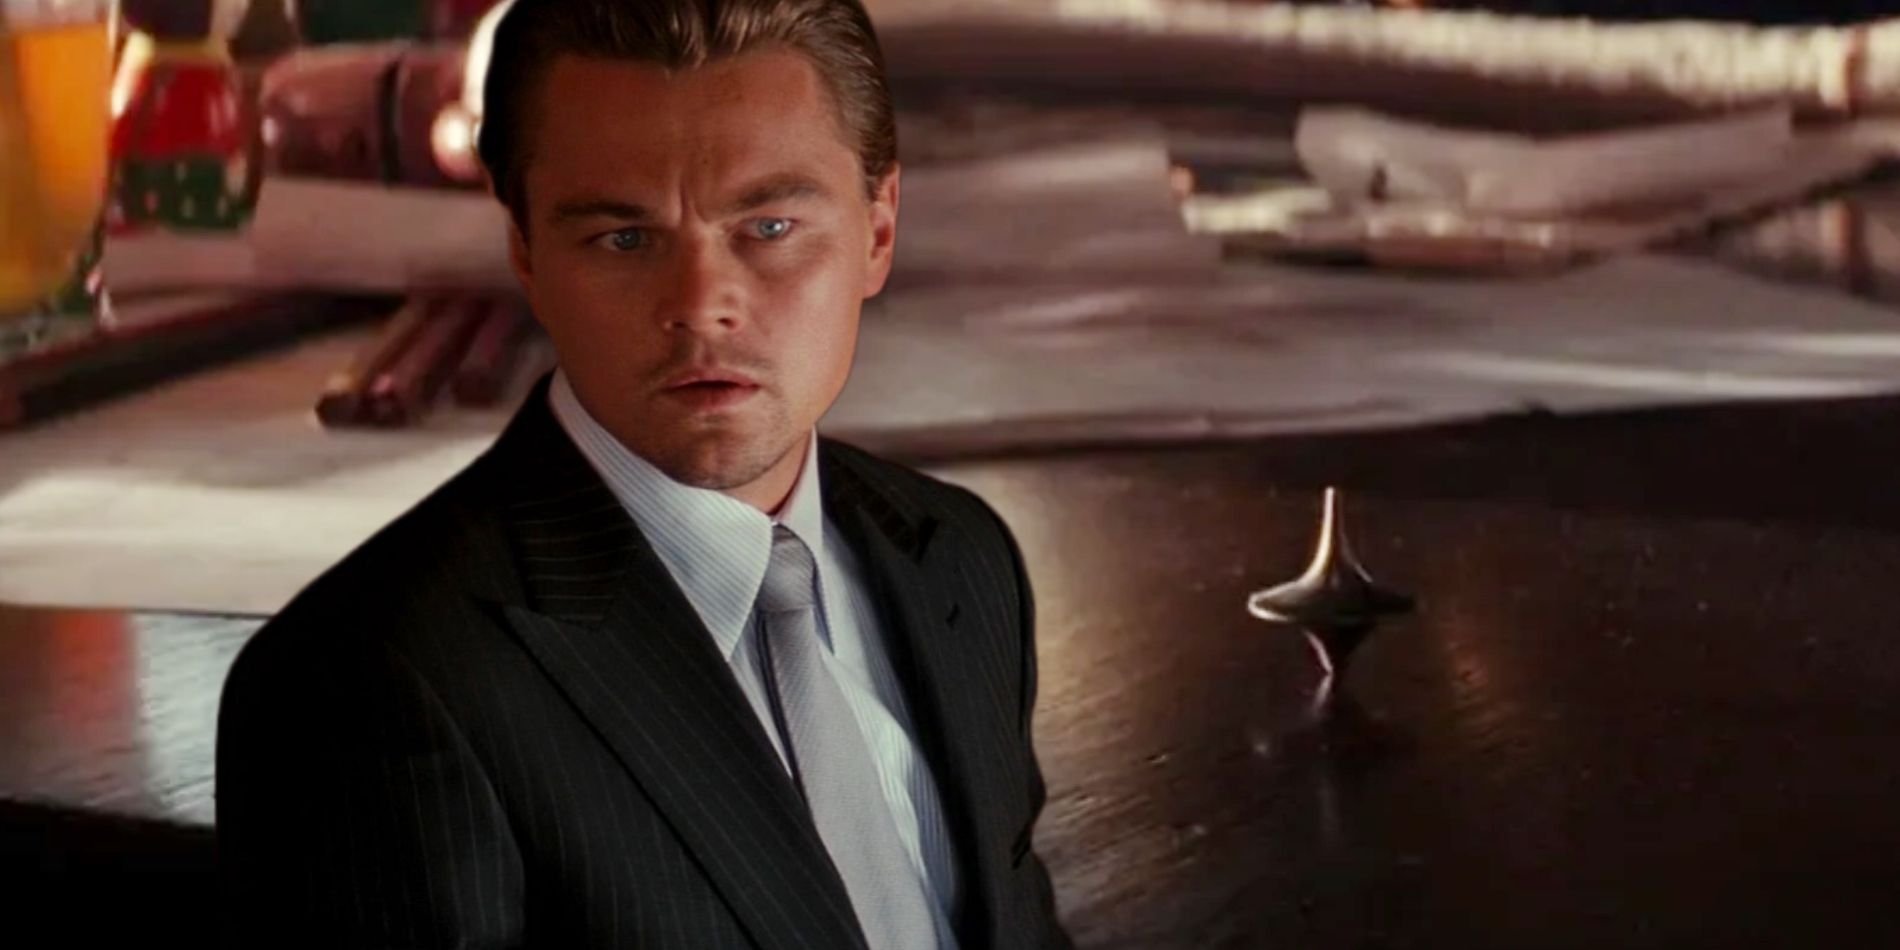 Leonardo-DiCaprio-in-Inception-Next-To-The-Spinning-Top-Totem